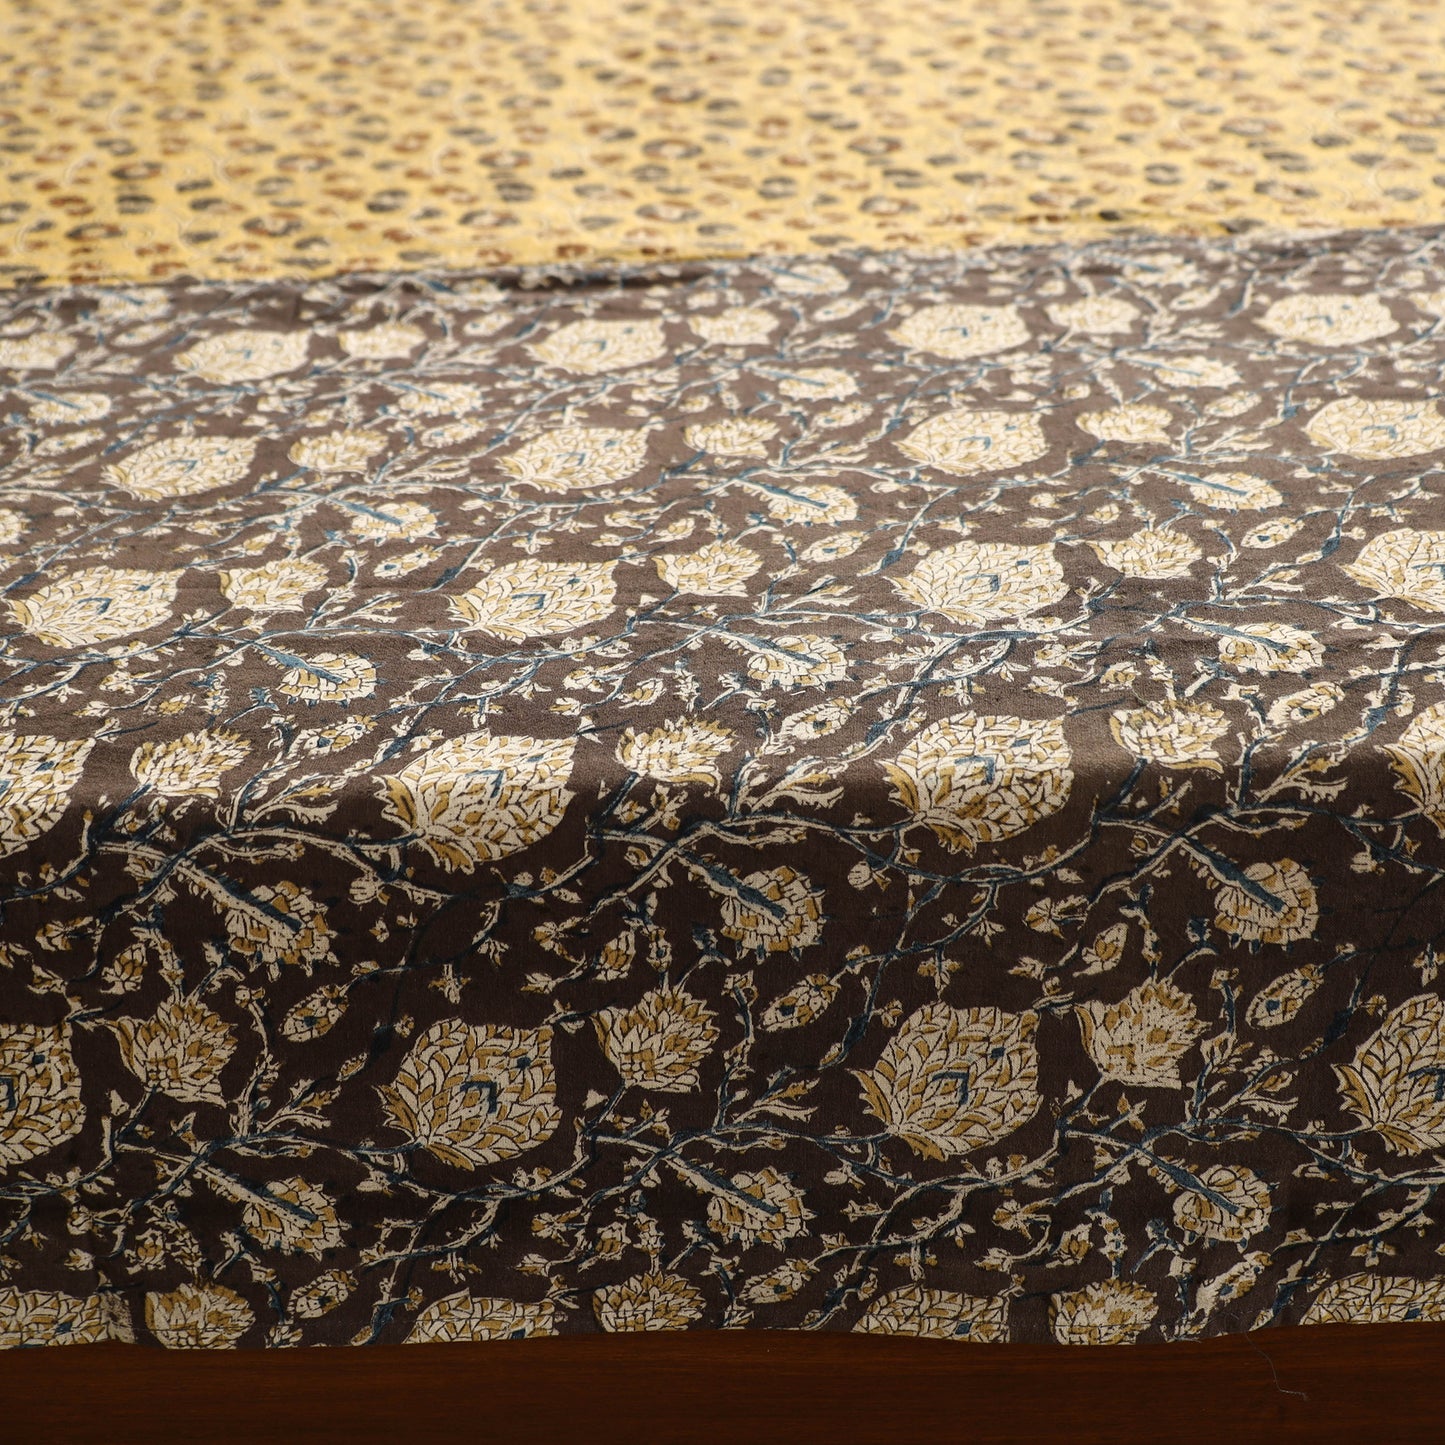 Black - Kalamkari Block Printed Patchwork Cotton Double Bed Cover With Pillow Covers (108 x 90 in)